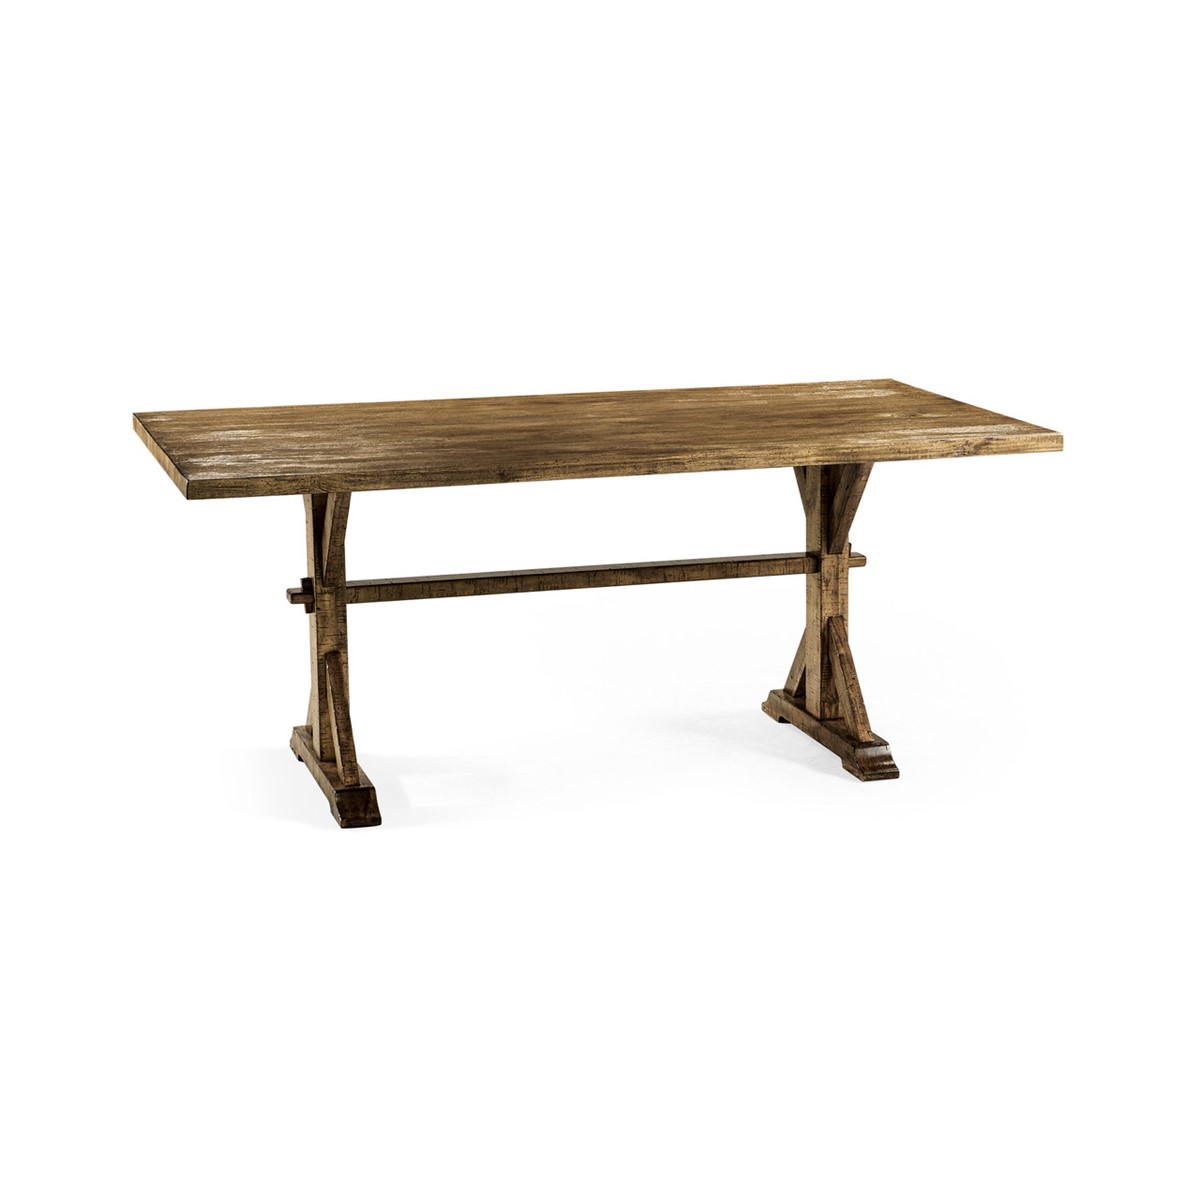 Casual Accents Medium Driftwood Dining Table 72